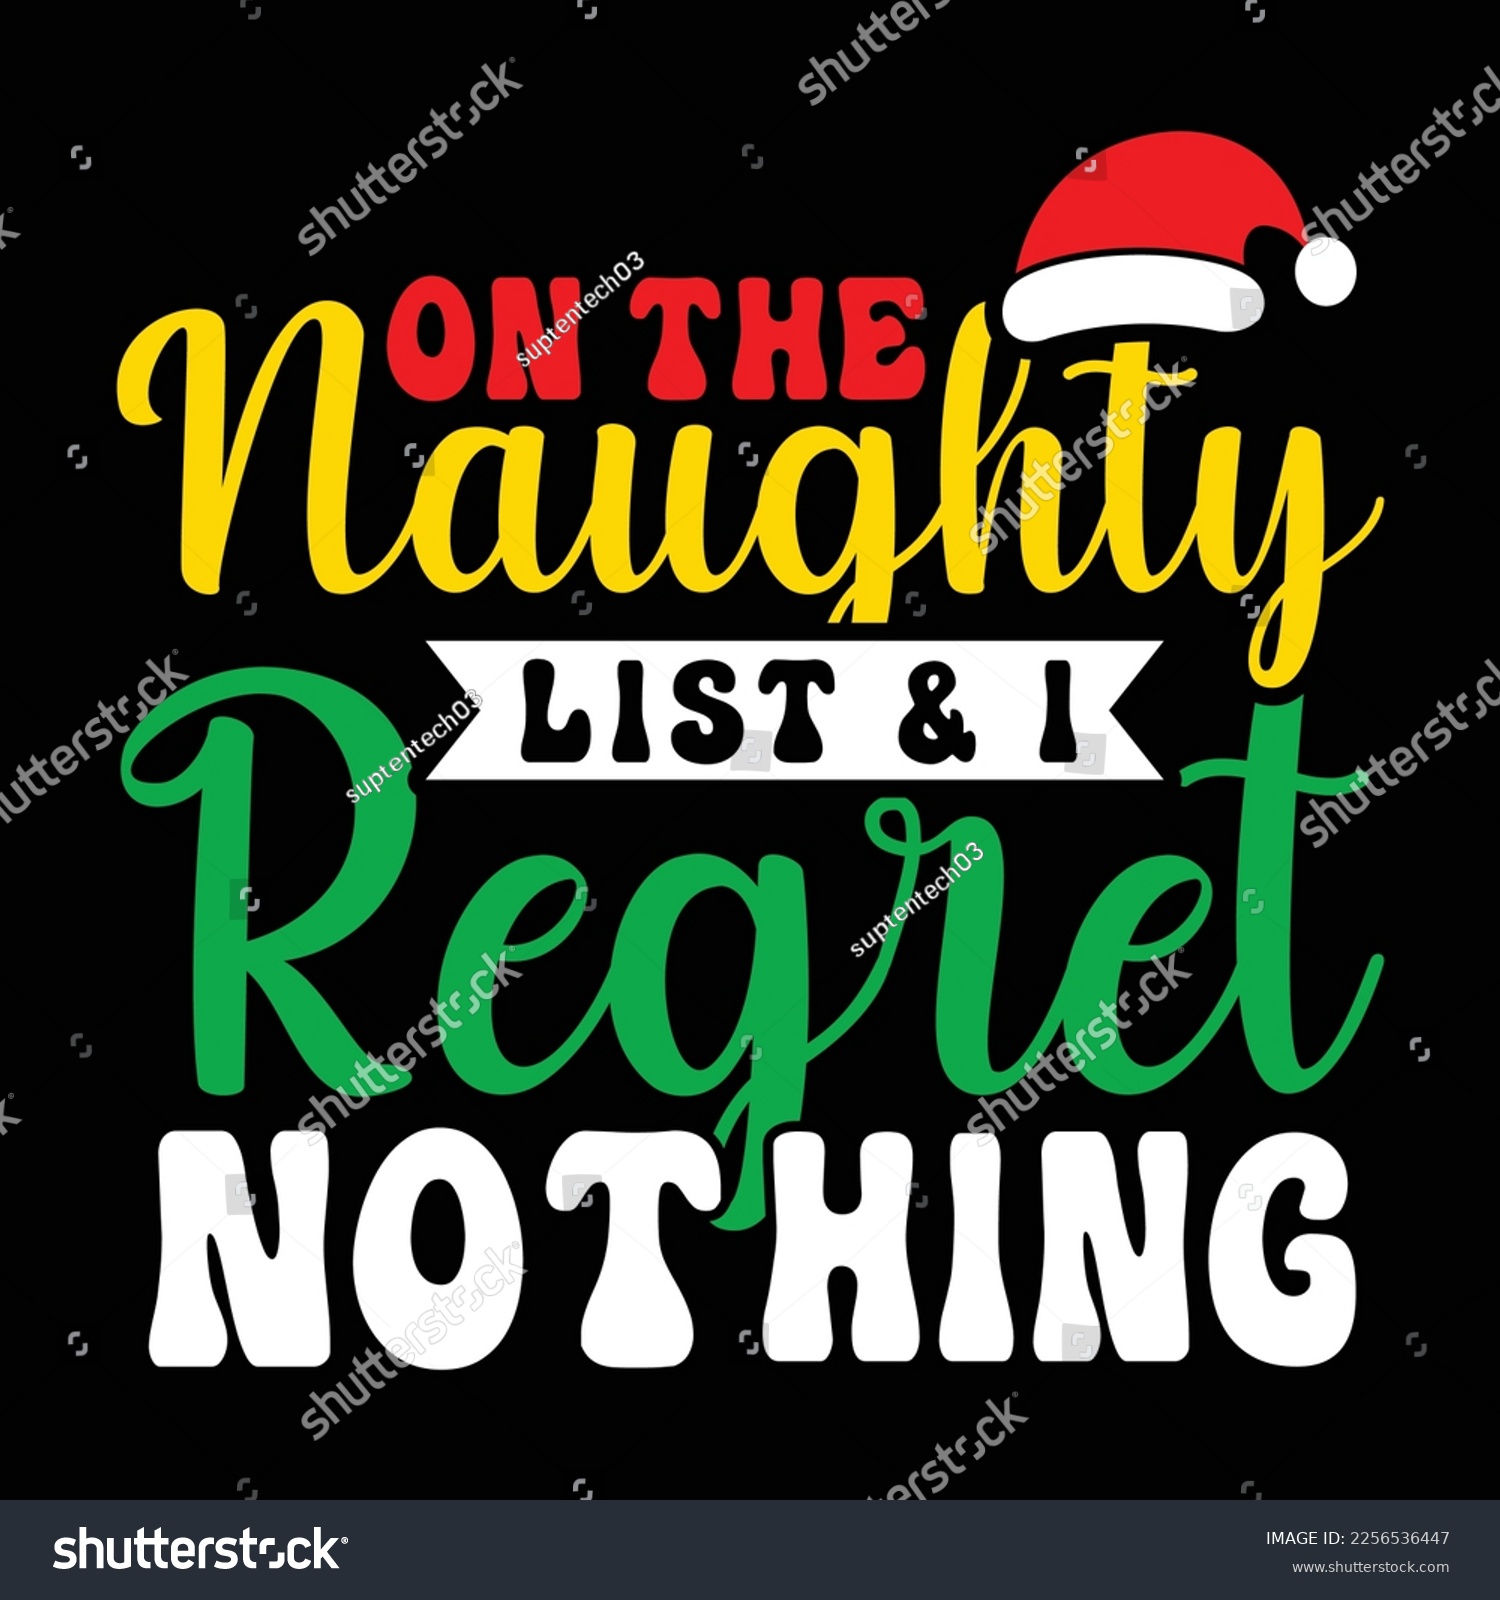 SVG of On The Naughty List  I Regret Nothing, Merry Christmas shirts Print Template, Xmas Ugly Snow Santa Clouse New Year Holiday Candy Santa Hat vector illustration for Christmas hand lettered svg